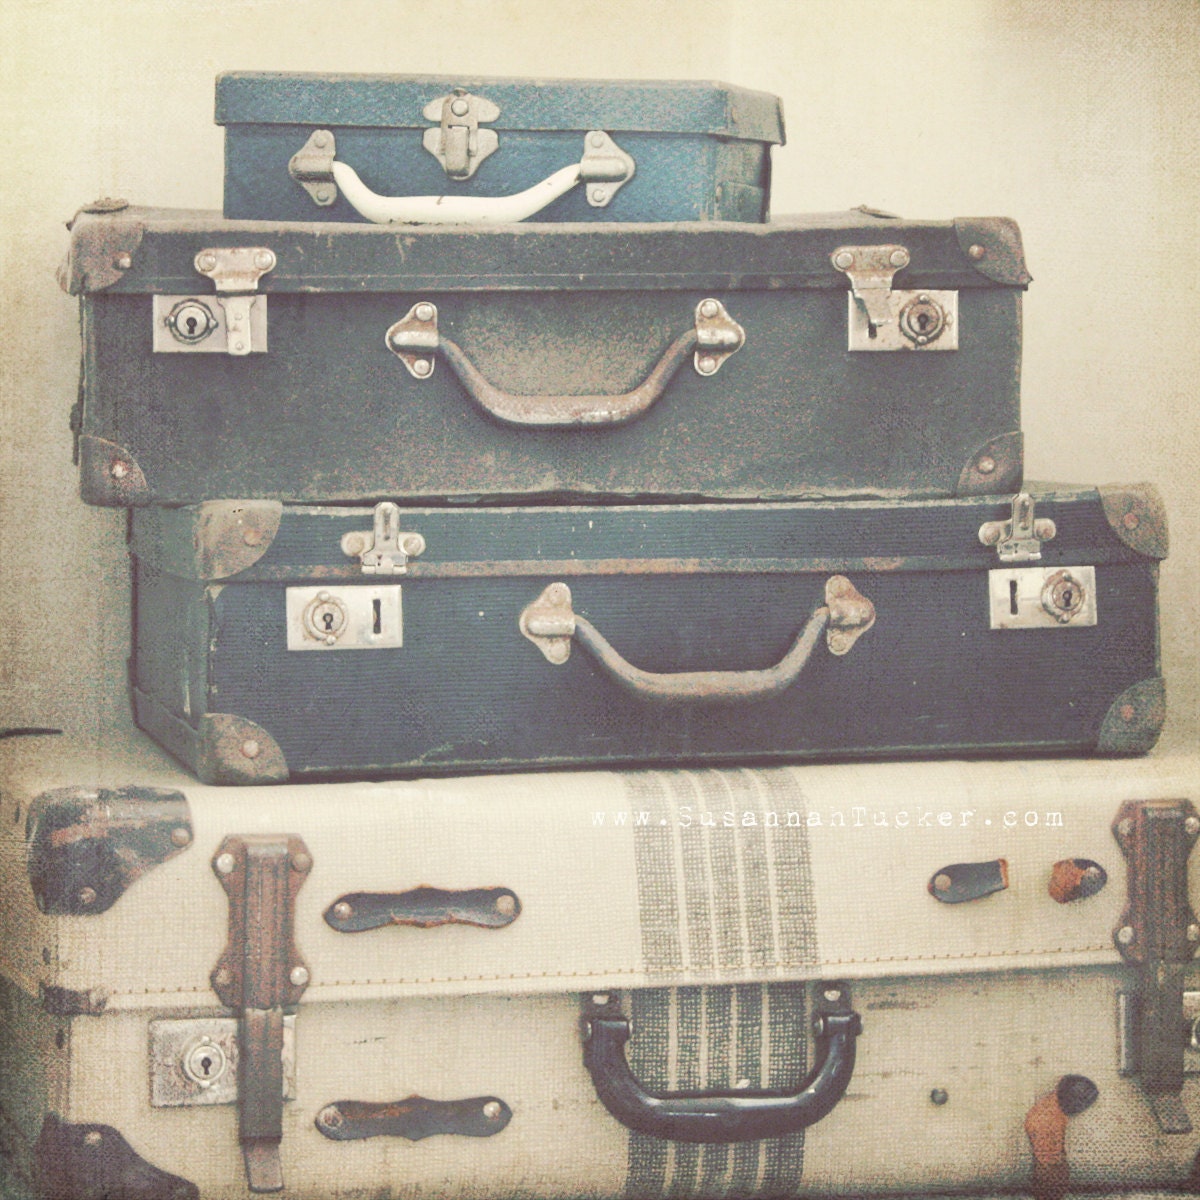 The Journey Begins - 8x8 nostalgic, rustic photo of vintage suitcases - travel and adventure, wanderlust, still life, neutral tones, blue